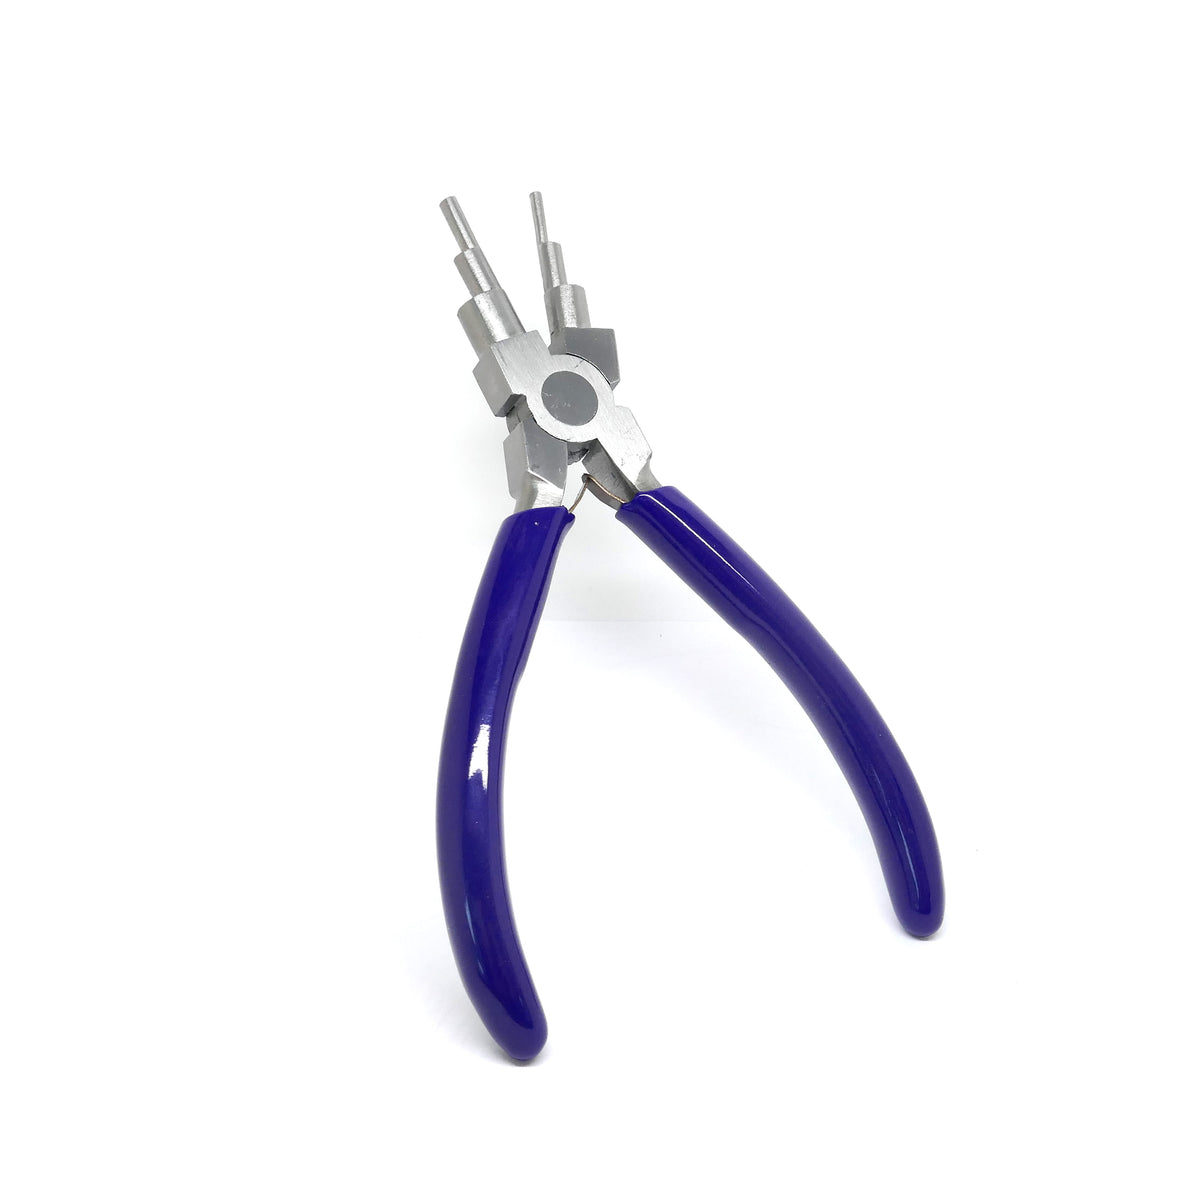 Jewelry Making Pliers Slim Round Nose Professional Repair Stainless Steel Tool with Cushion Grip for Handmade DIY Craft, Size: Small